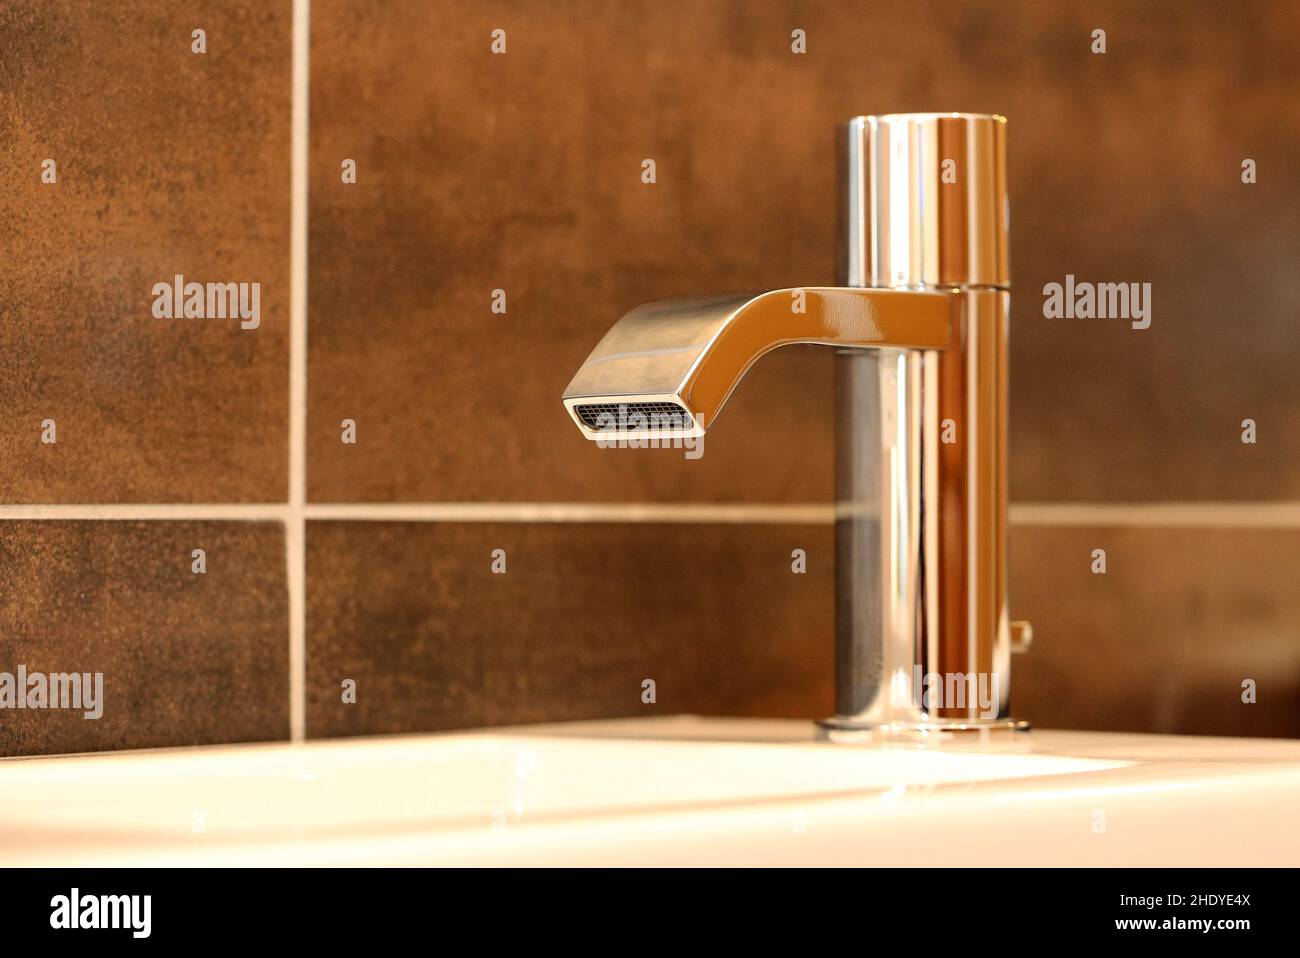 faucet, bathroom fittings, faucets Stock Photo